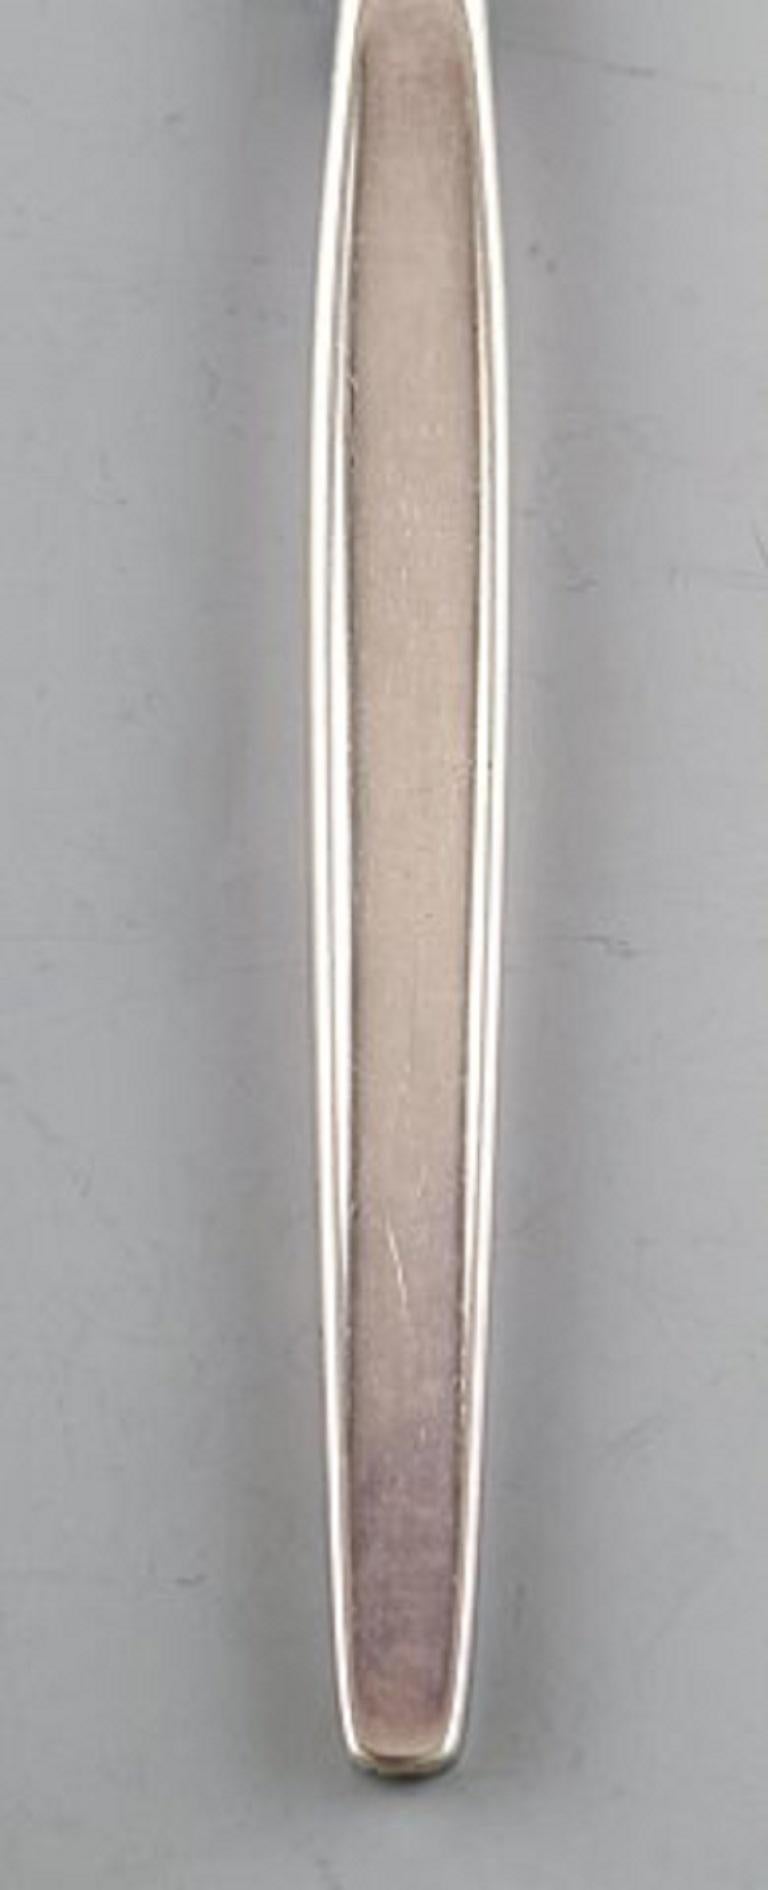 Georg Jensen sterling silver cypress dinner knife.
Measures: 22.5 cm.
In perfect condition.
Stamped.
Designed by Tias Eckhoff 1952-1953 For Georg Jensen Silversmith, Denmark. Cypress pattern no. 99.
4 pieces in stock.